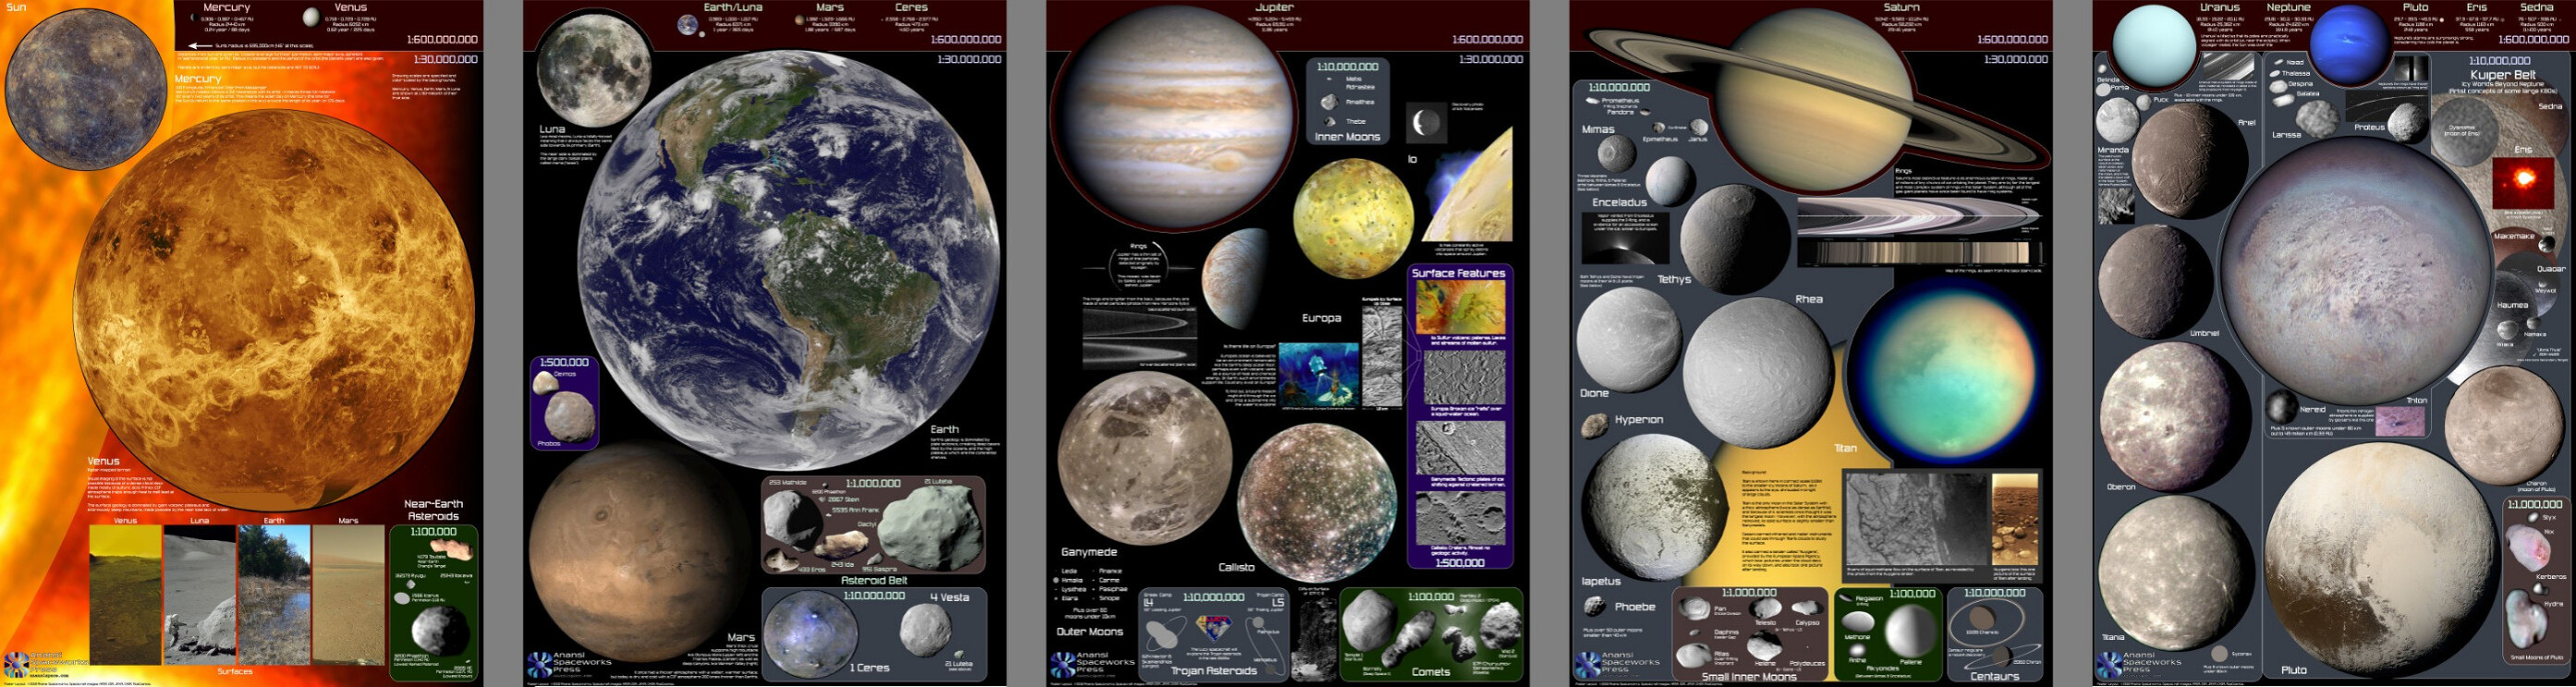 This is a set of five 19x27" (48x69cm) posters, presenting the solar system as a collection of worlds, including Sun, planets, dwarf planets, asteroids, and moons, with an emphasis on the solid body objects you could visit (theoretically and radiation allowing).

It wasn't practical to keep all the objects to the same scale, but I made effort to minimize the different scales shown and make the differences clear.

As a mosaic, they take up about 8-ft (2.5m) of wall space. Or you can frame them separately and spread them around a room (as for a classroom).

I still have quite a few on the shelf, available for sale in our Anansi Spaceworks "bookstore". 

Designed by Terry Hancock (me), using free NASA imagery and data.
https://books.anansi.space
